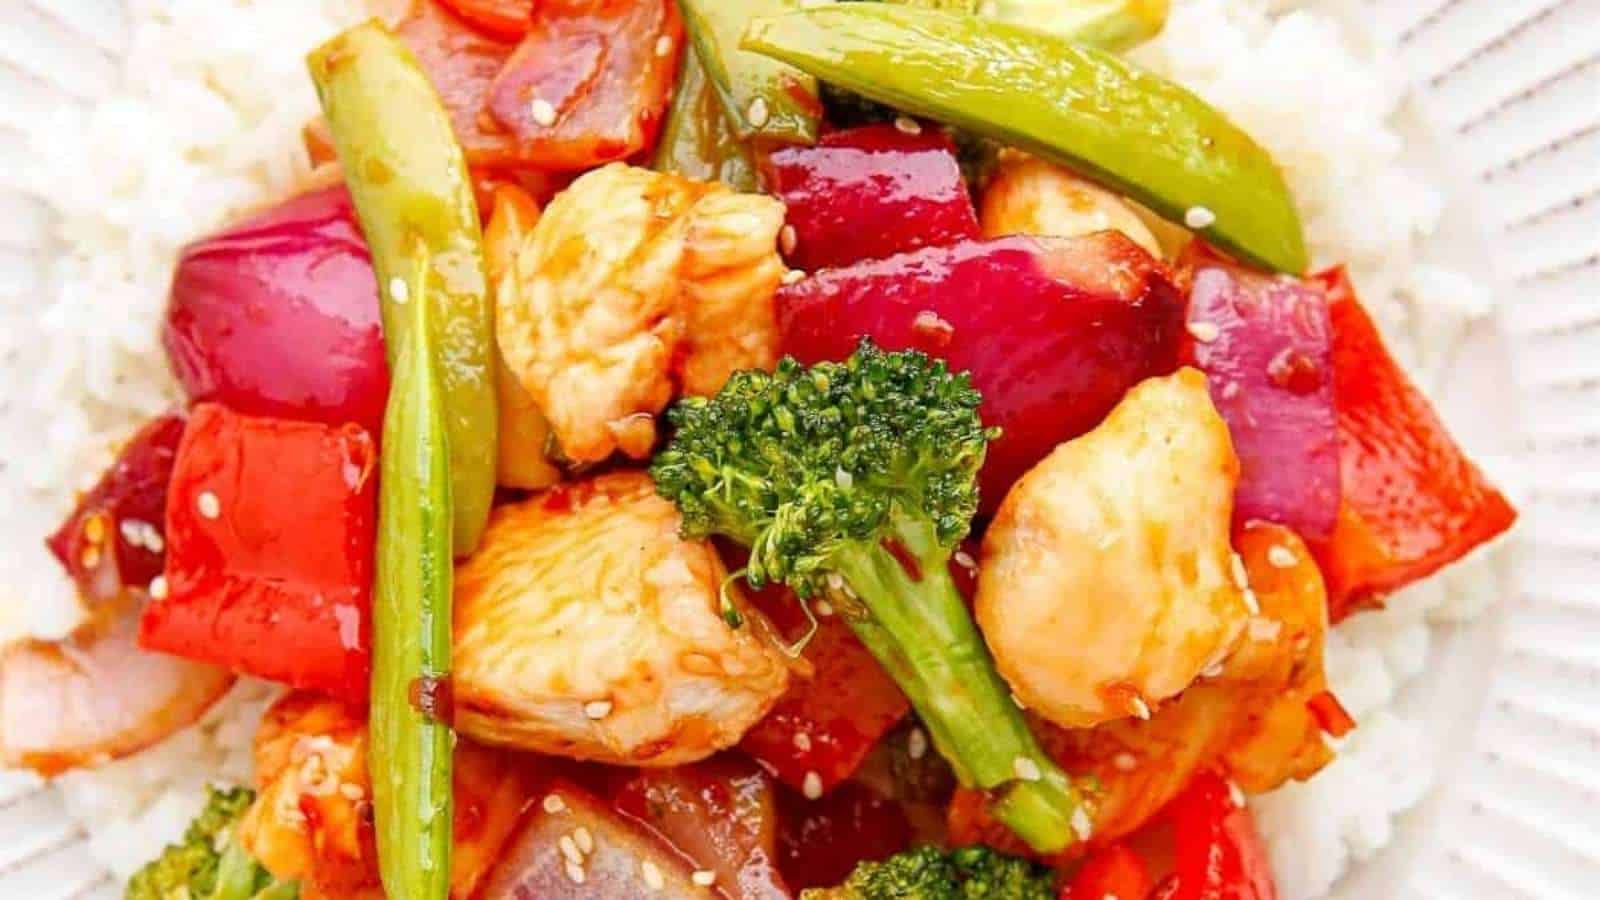 Chicken stir fry with broccoli and red peppers.